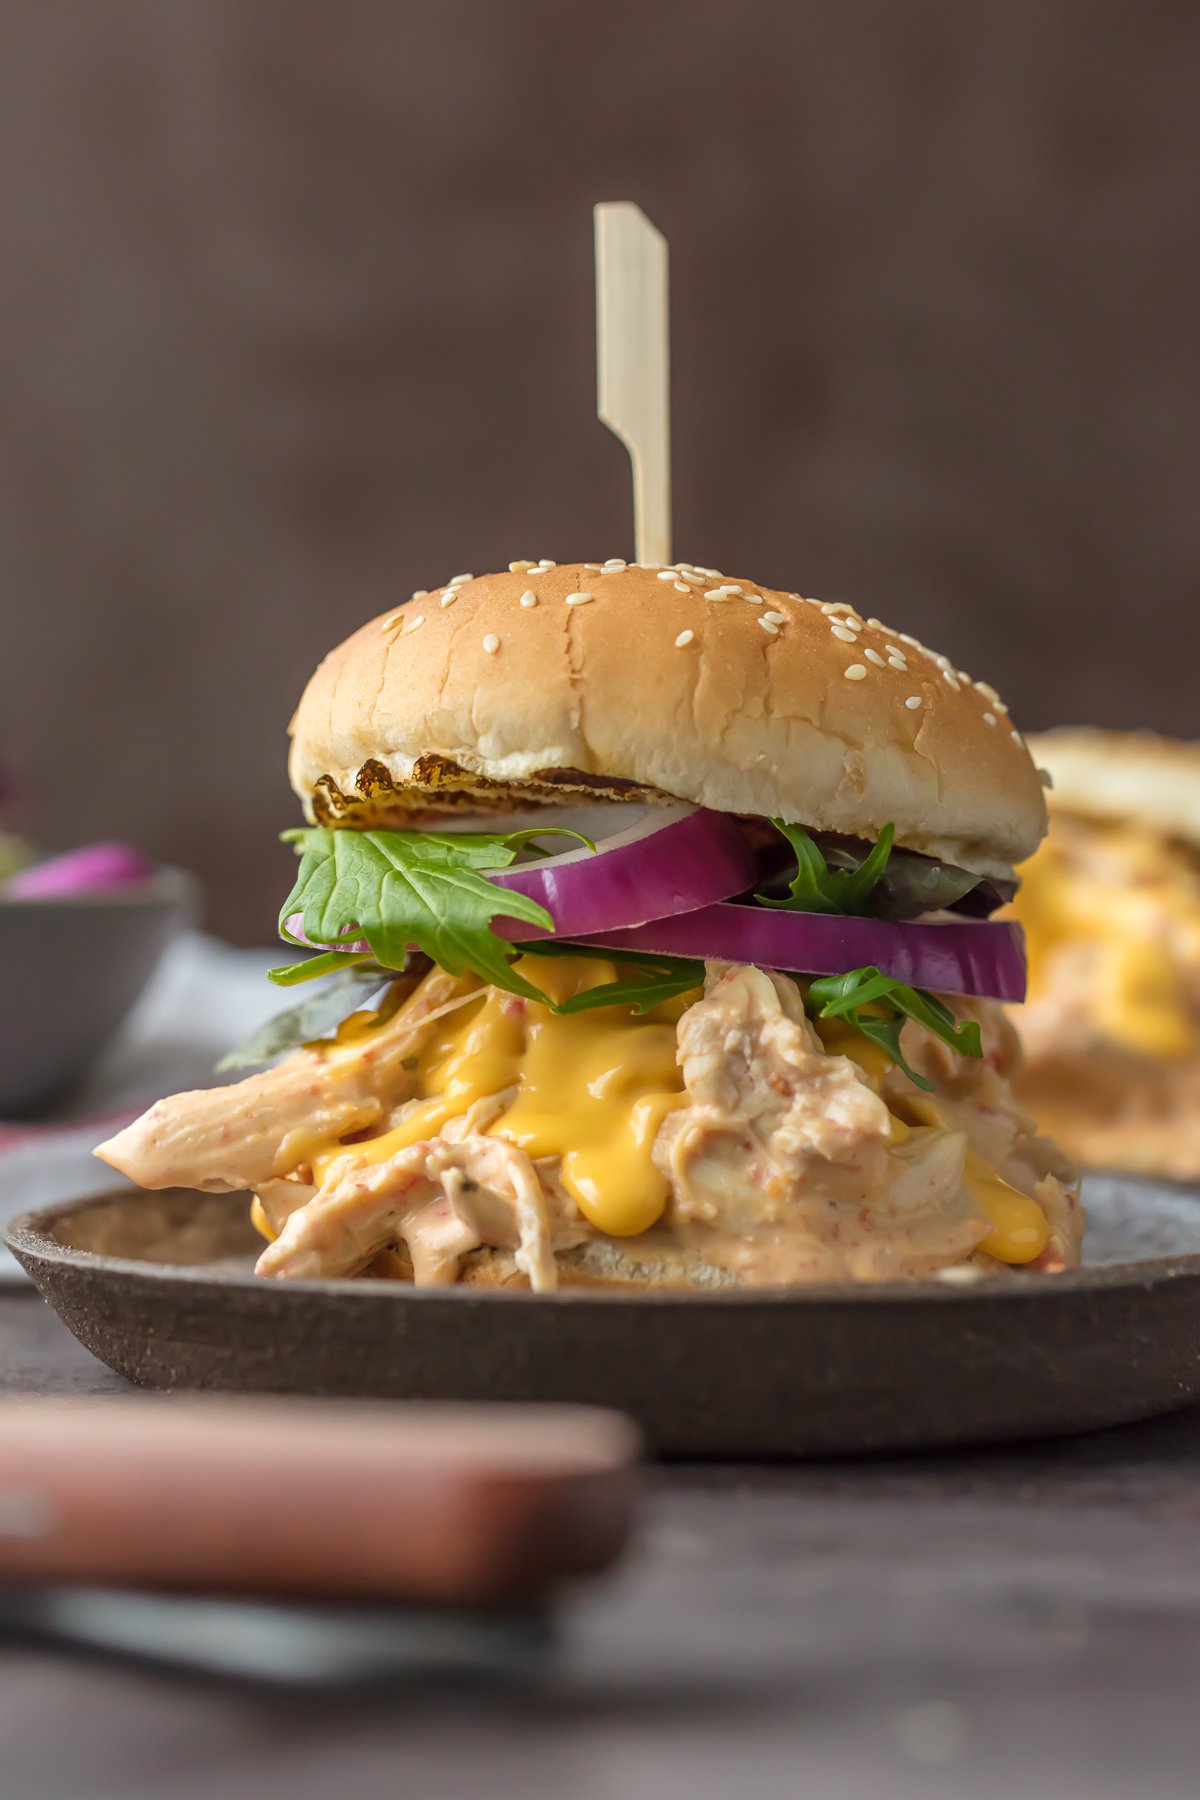 SLOW COOKER ROTEL DIP CHICKEN SANDWICHES are the ultimate way to tailgate for the Super Bowl! Spicy Cheesy Chicken Sandwiches made in the crockpot. SO MUCH FLAVOR! So addicting.